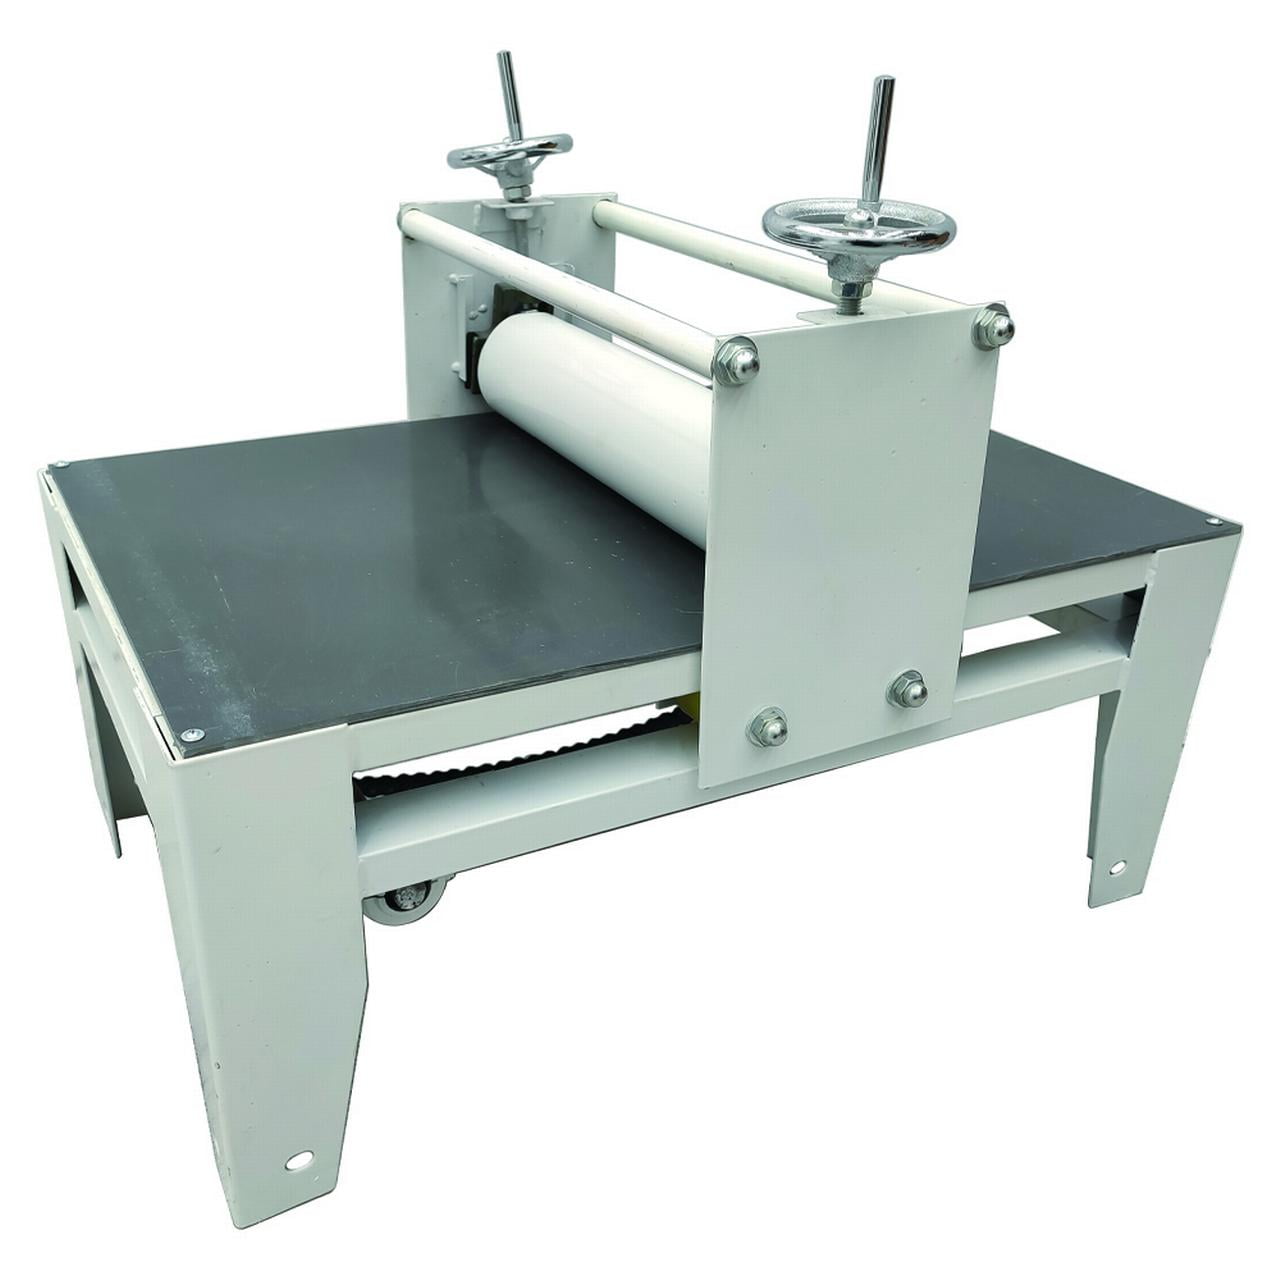 Techtongda Ceramic Clay Plate Machine Slab Roller for Clay& Heavy Duty  Hand-Cut Table Top Adjustable No Shims